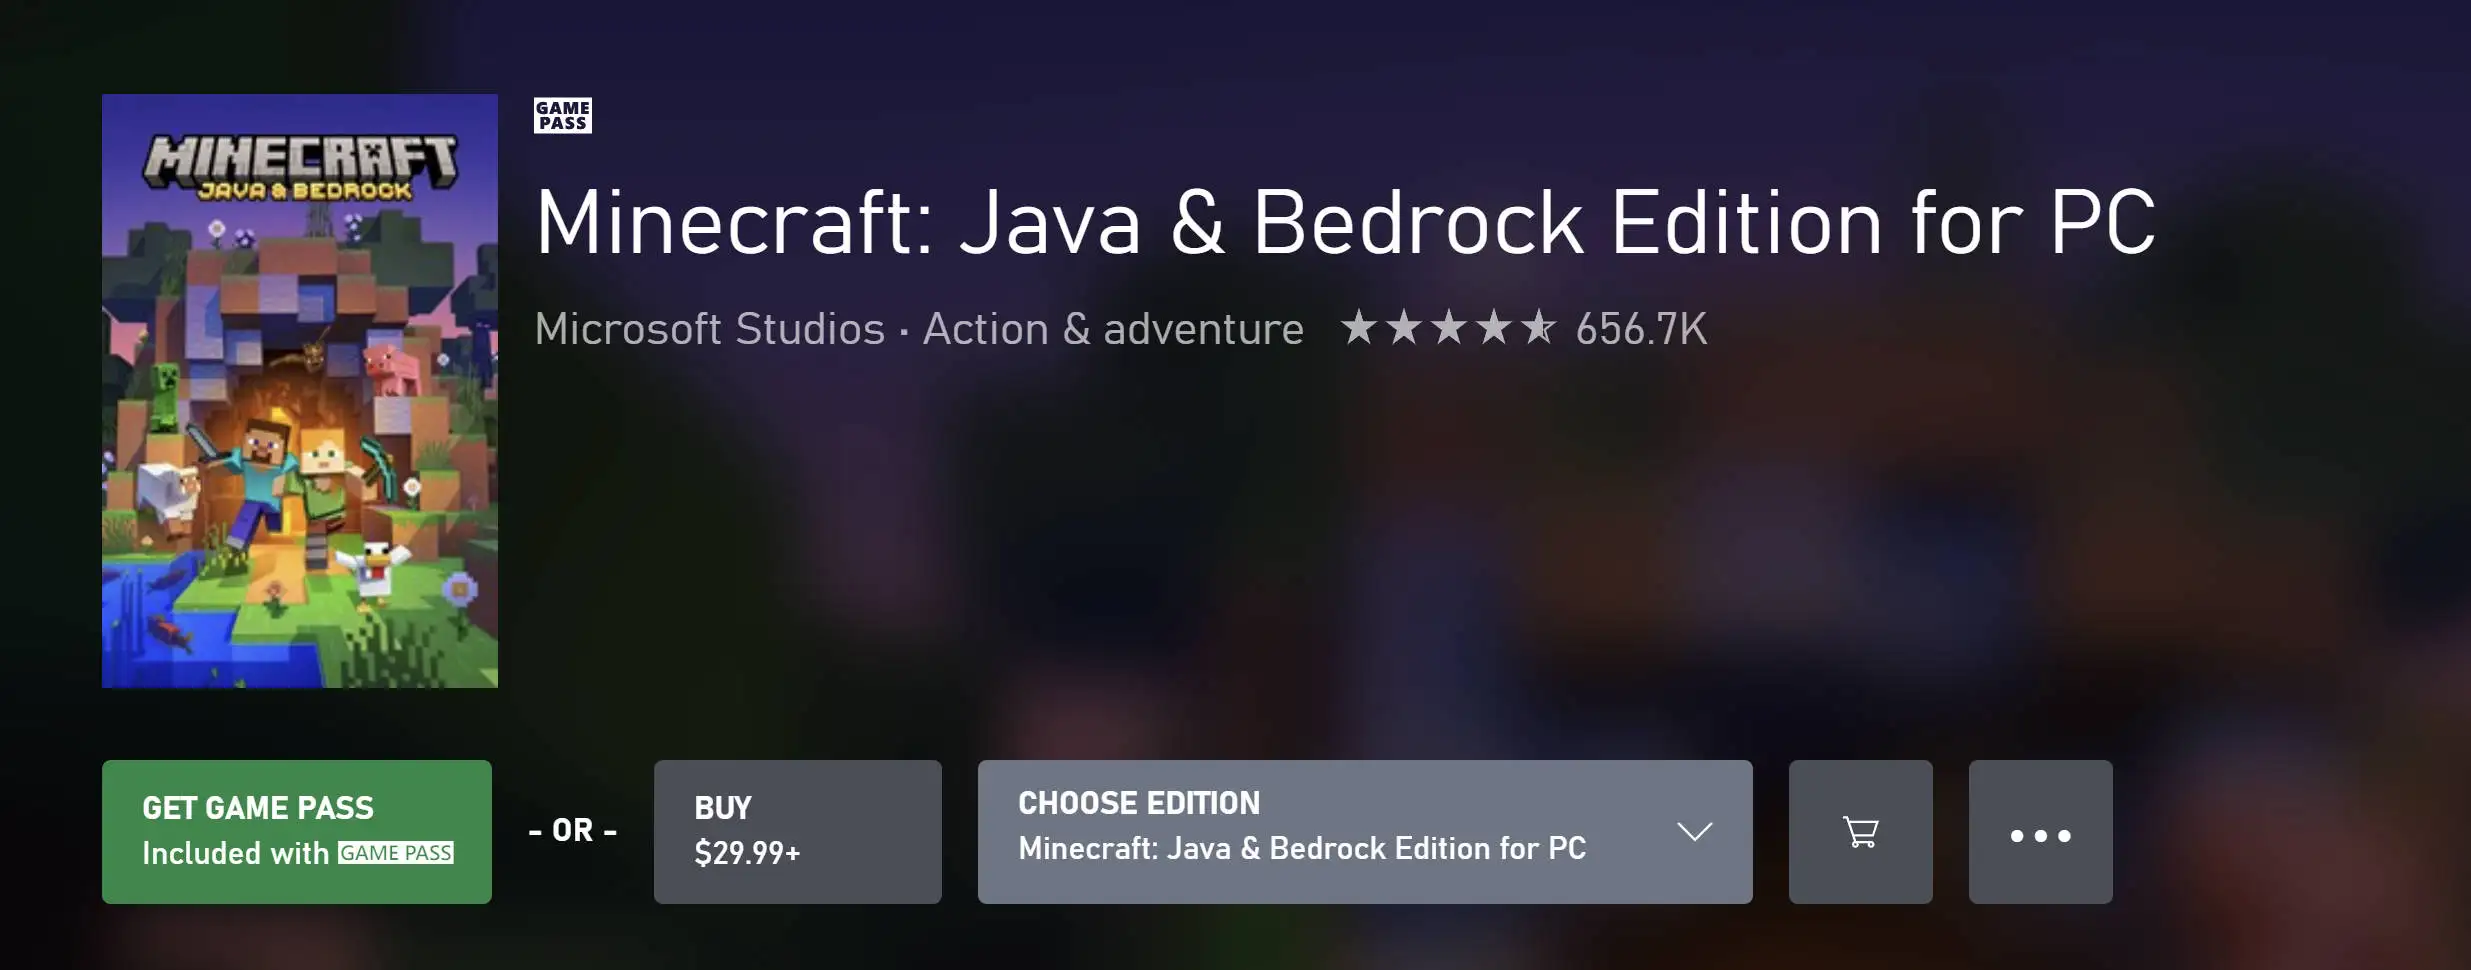 Minecraft Java & Bedrock Editions out now for PC as package deal